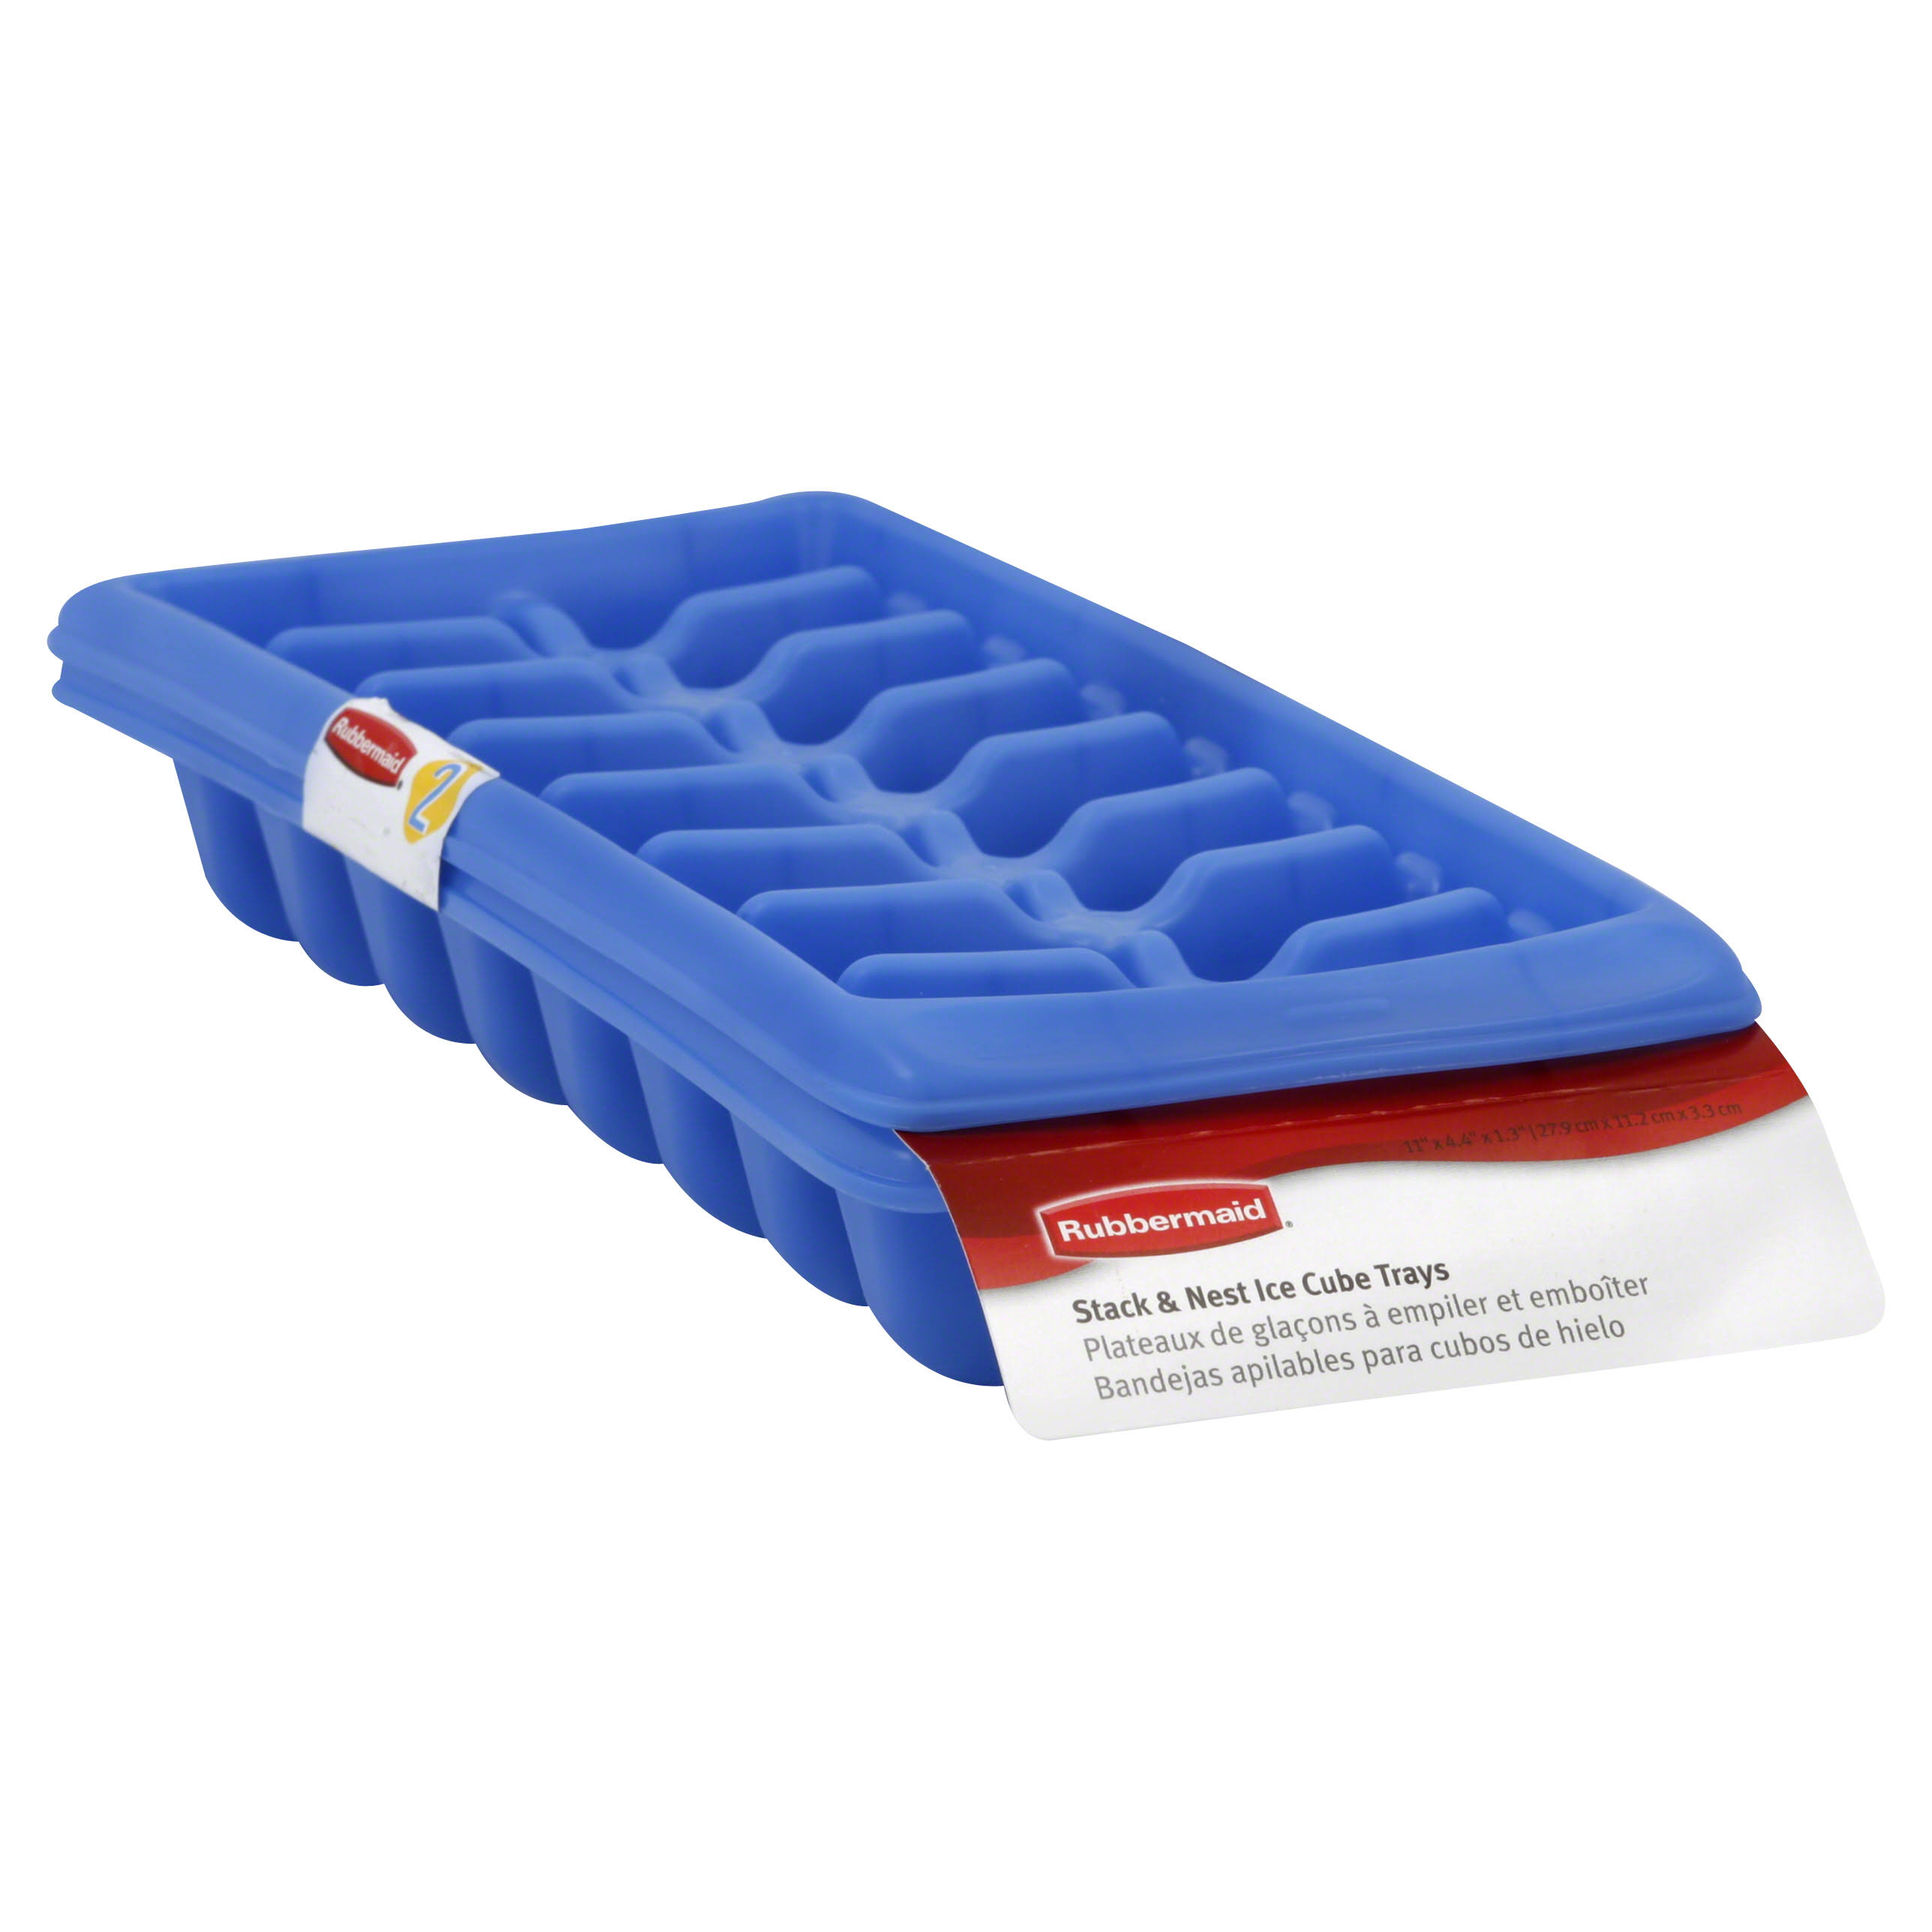 Rubbermaid Ice Cube Trays - 2 Trays, Blue